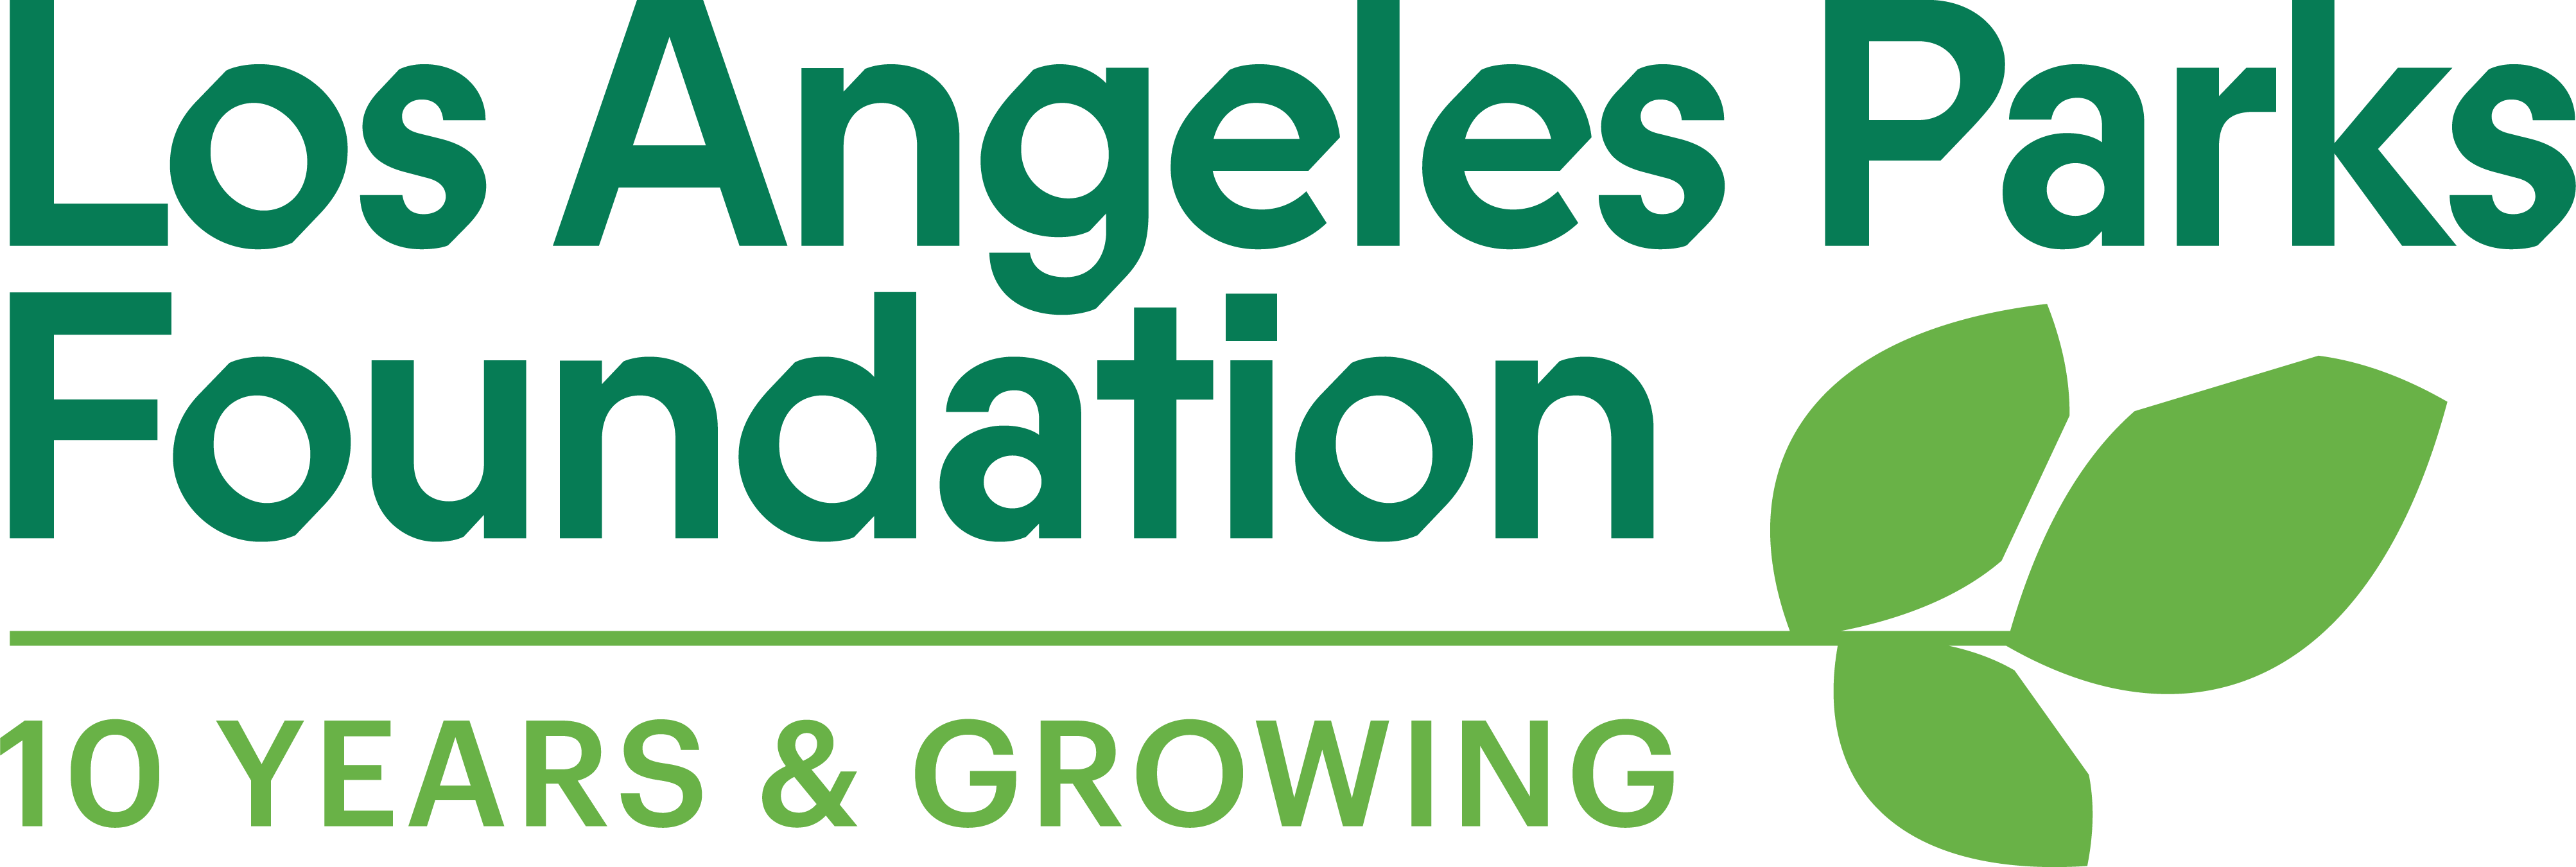 LA Parks Logo - City of Los Angeles Department of Recreation and Parks